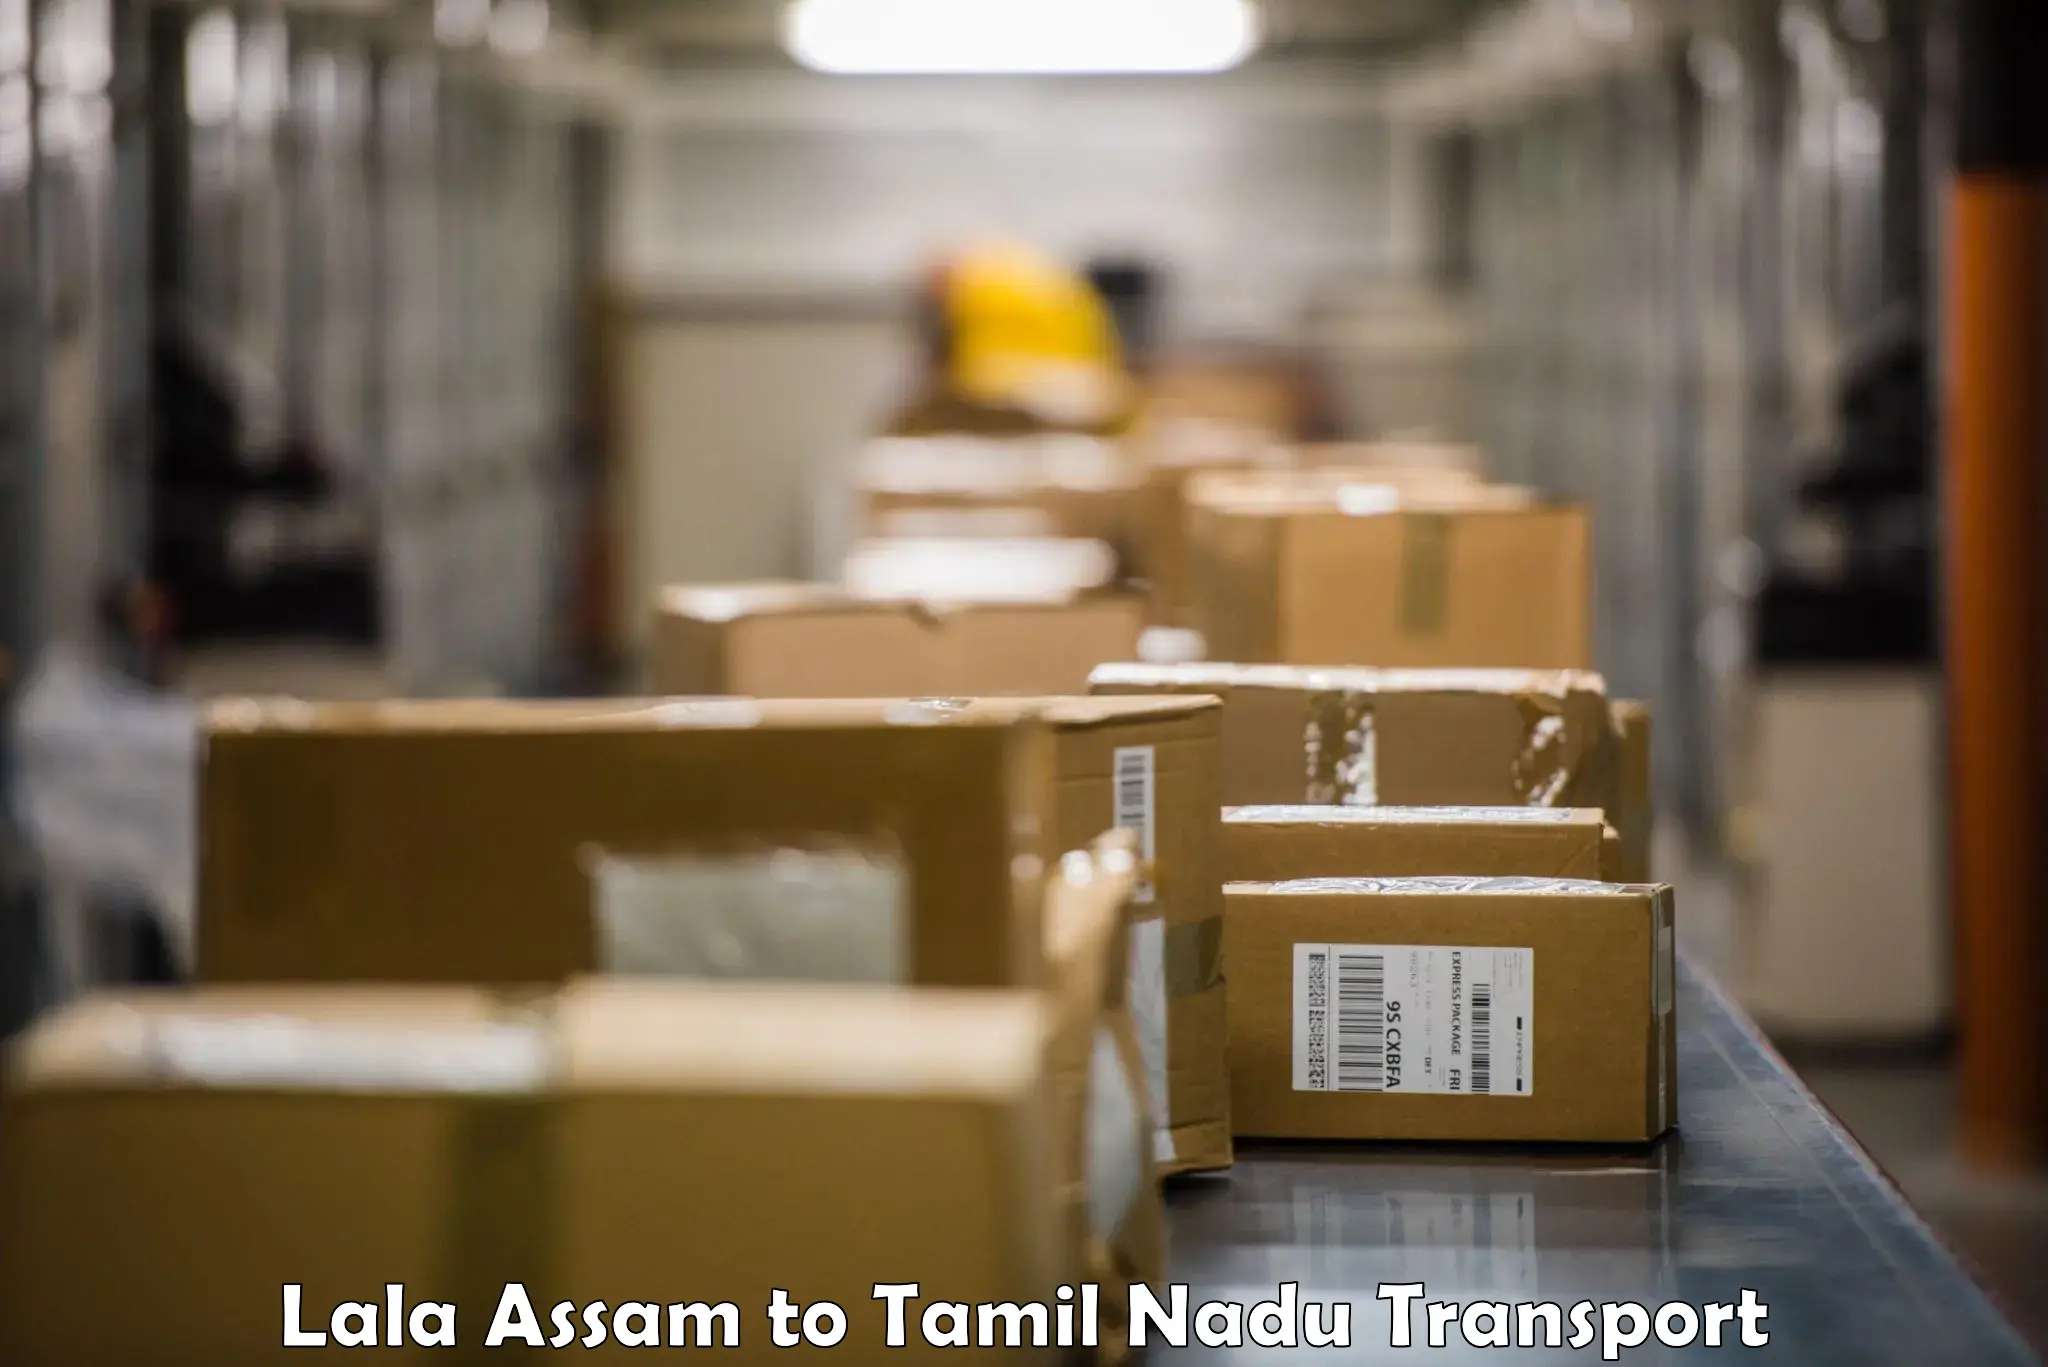 Container transport service Lala Assam to Suramangalam